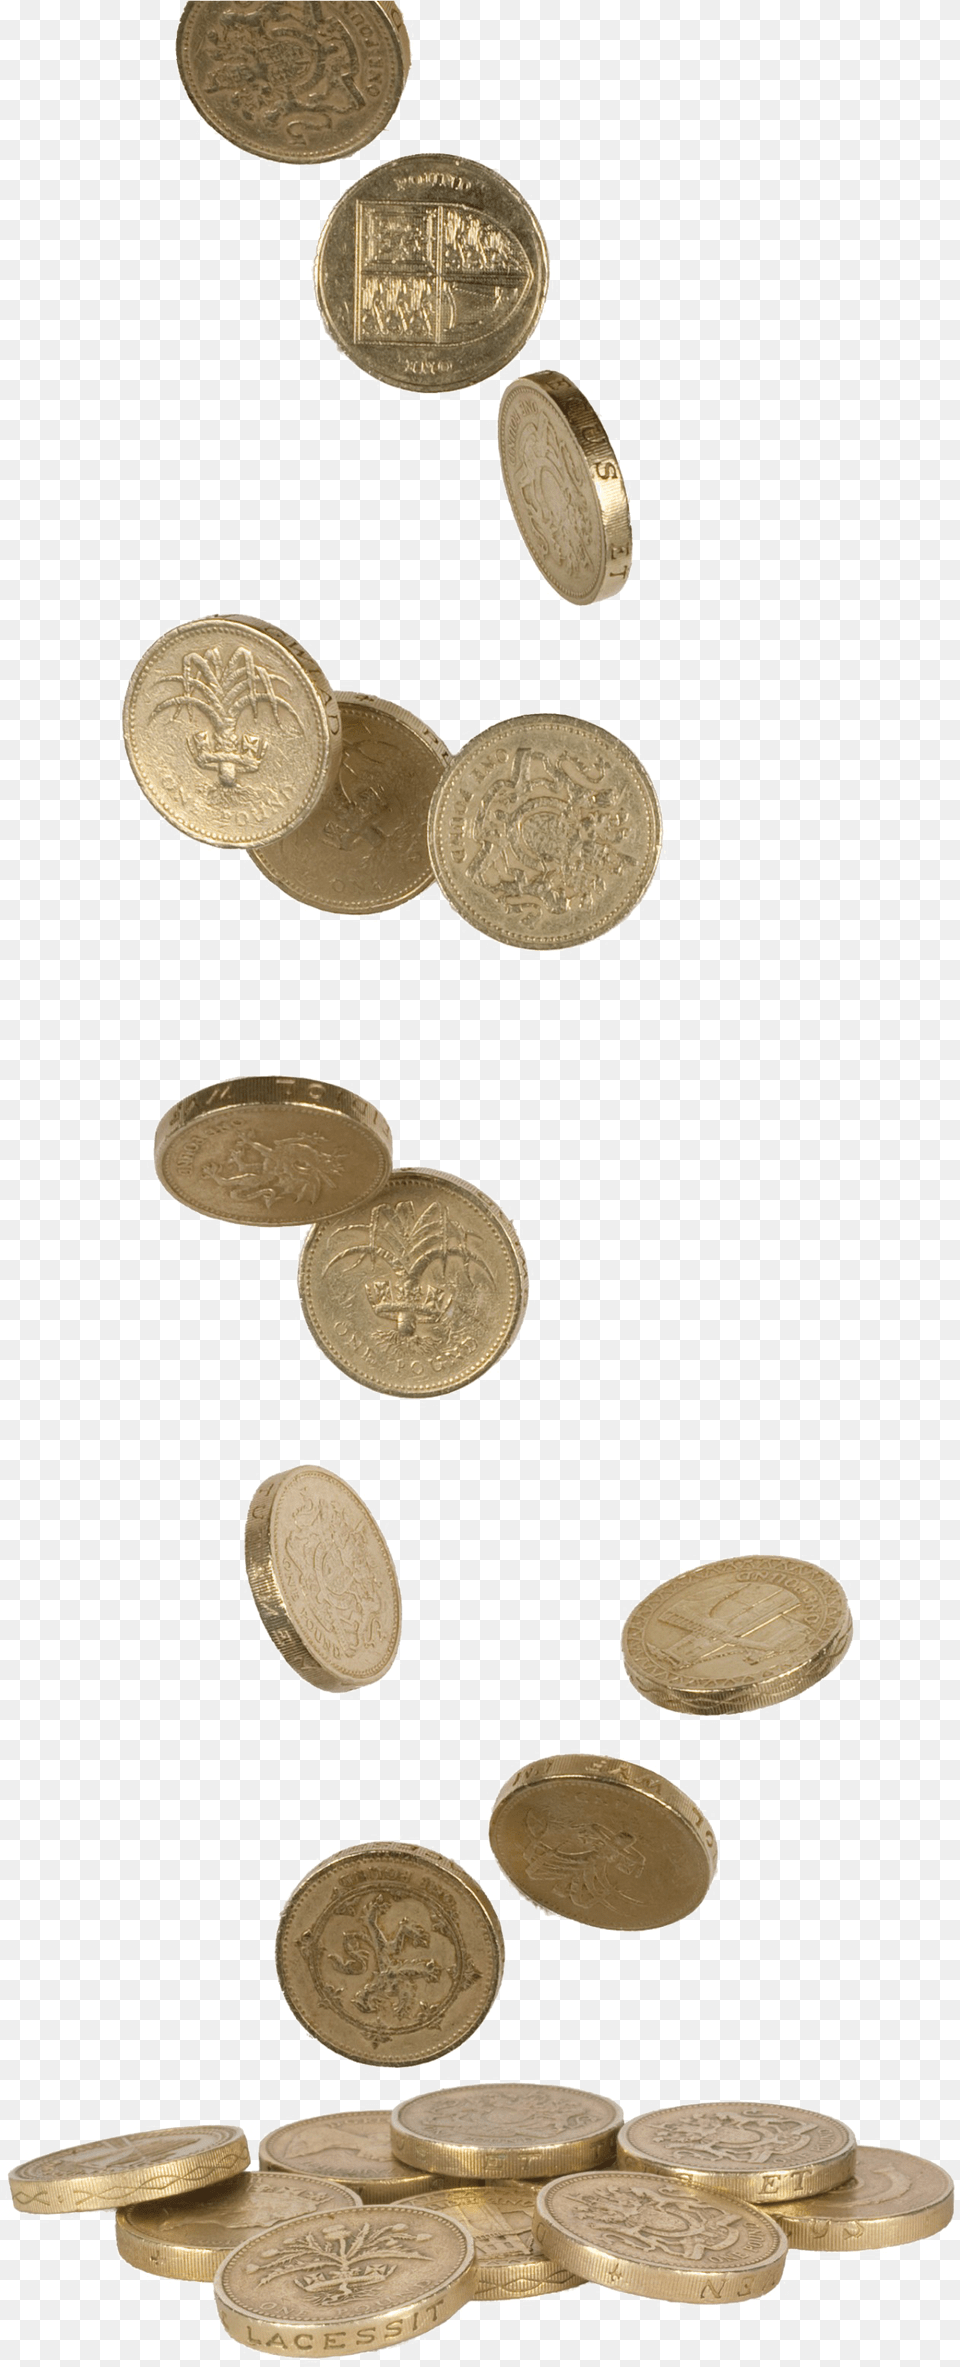 Falling Coins Download Image Money Coins Falling Transparent, Treasure, Coin, Accessories, Jewelry Png